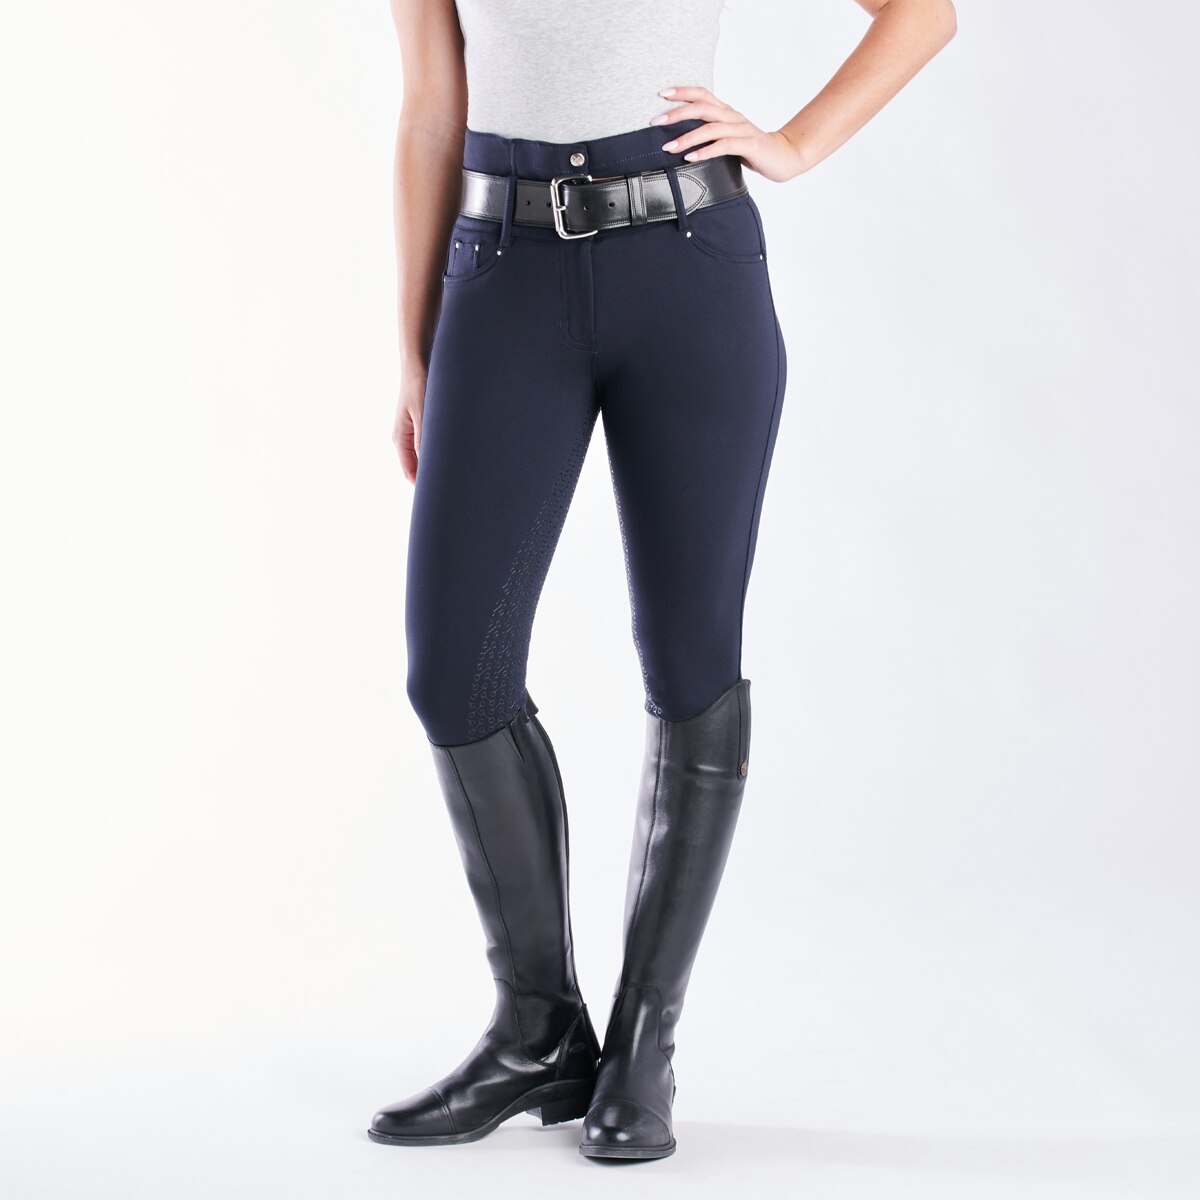 High Waist with 2 Front and 2 Back Pockets Stretchable HORZE Women's Tara Full Seat Silicone Grip Breeches 